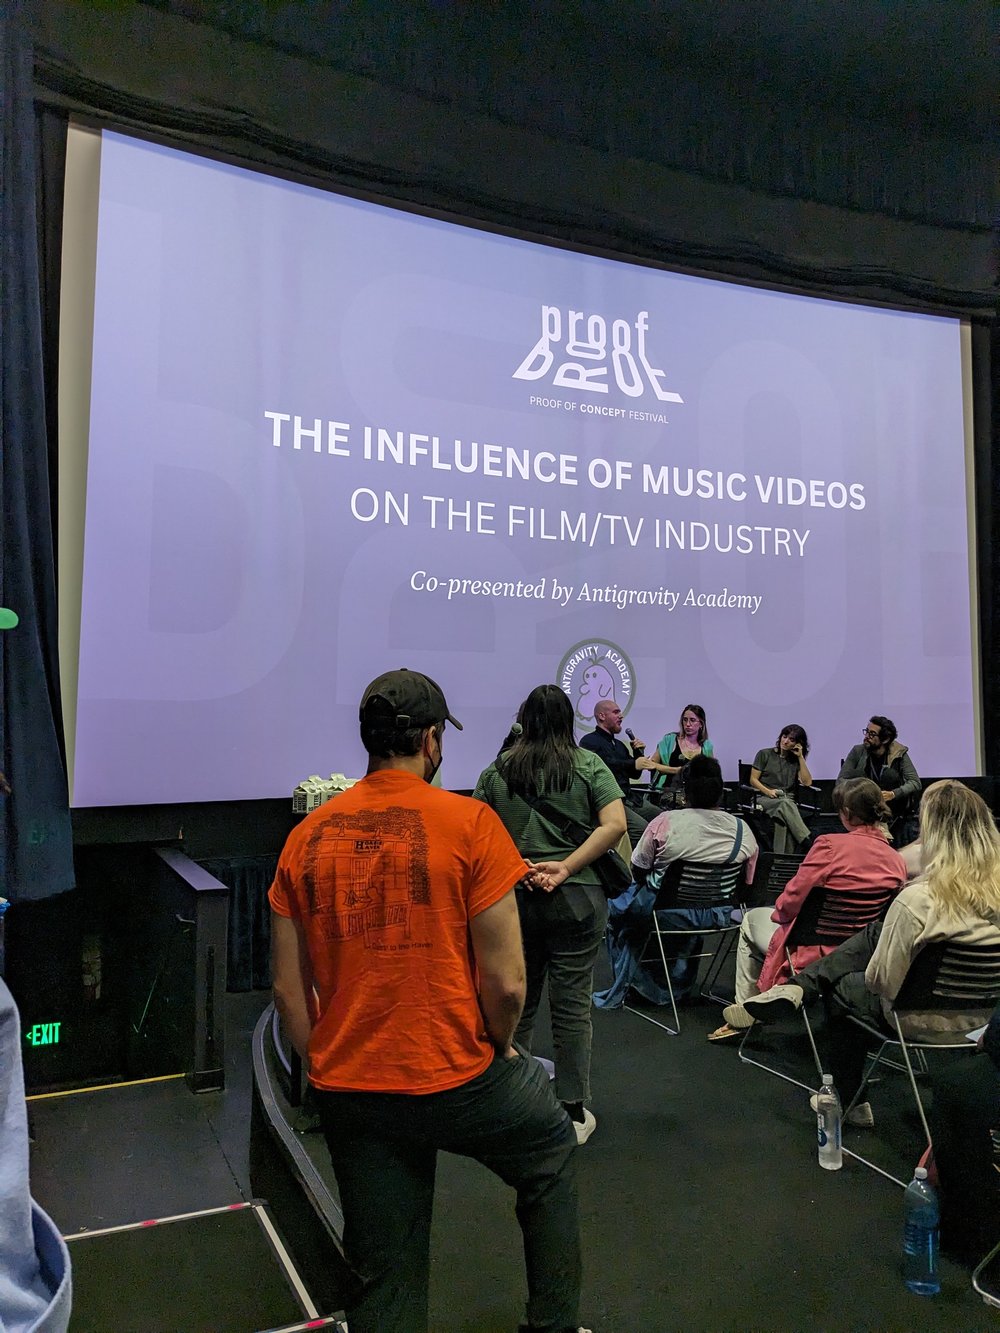 The influence of Music Videos on the Film/TV Industry panel